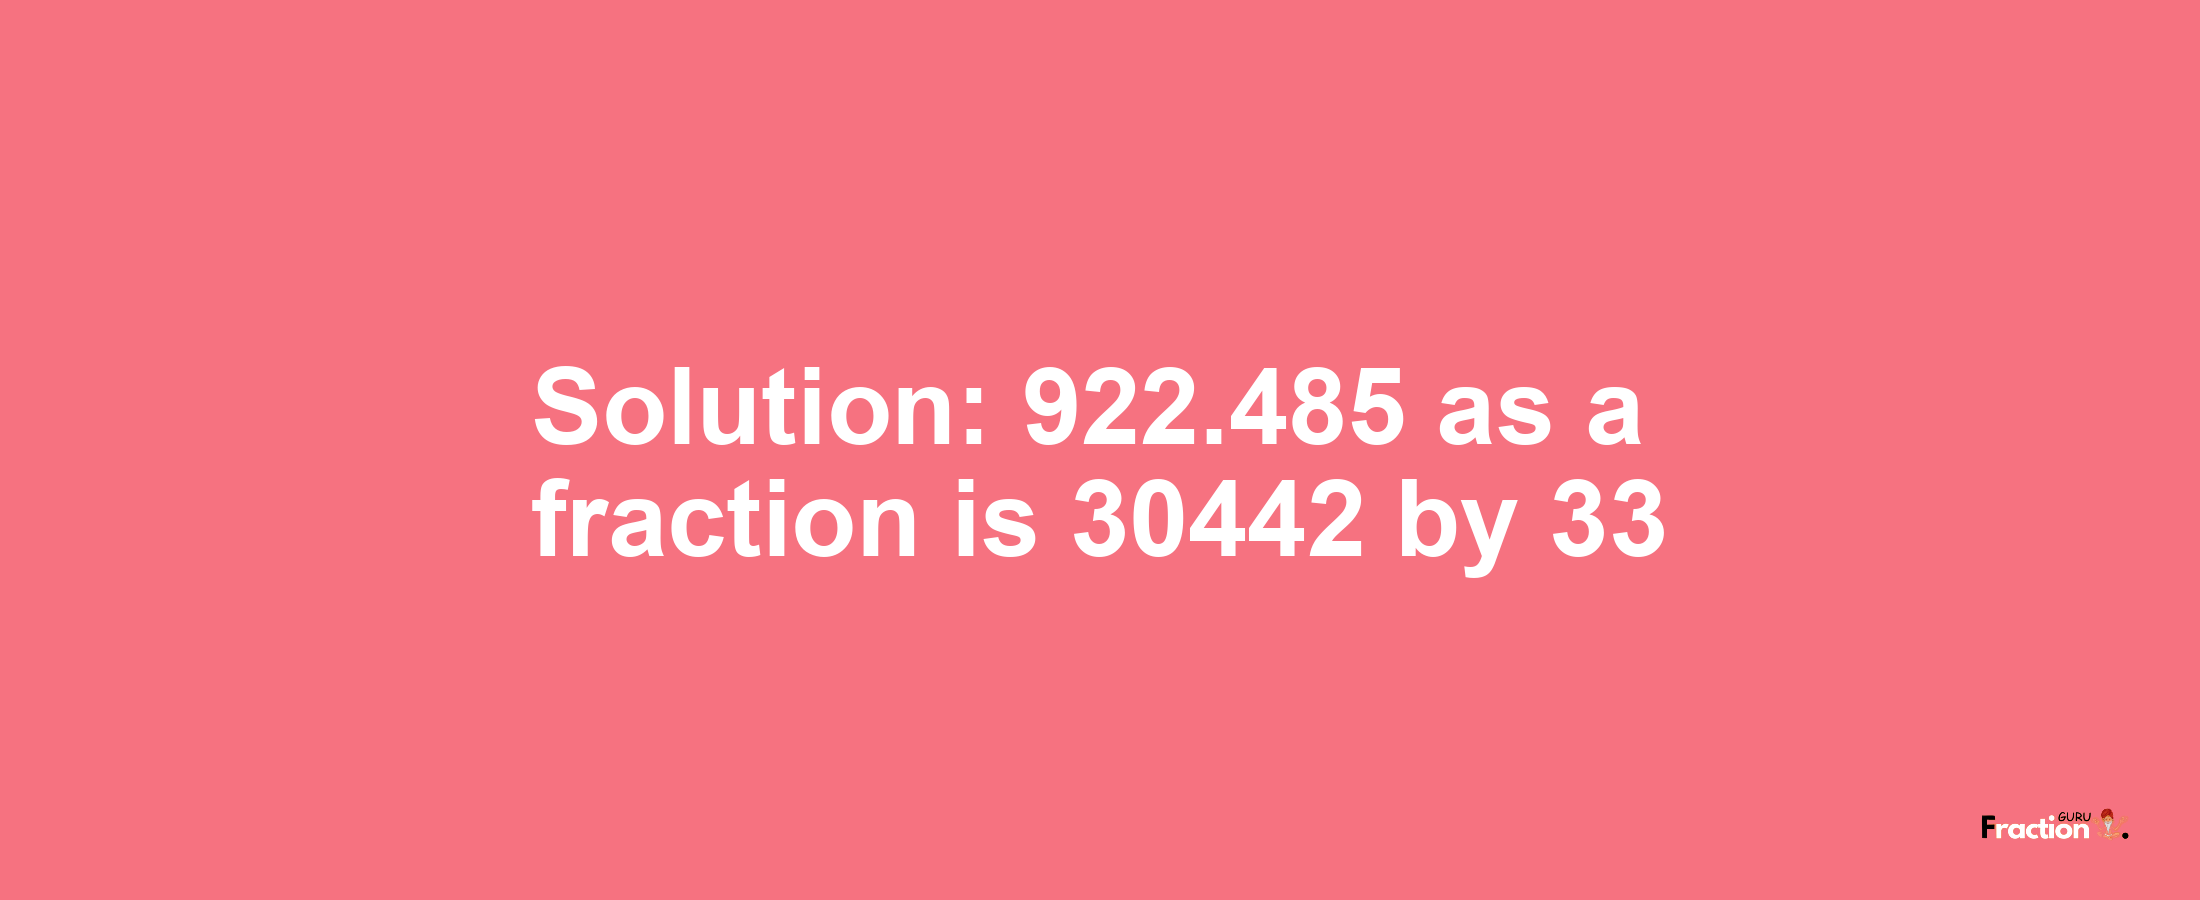 Solution:922.485 as a fraction is 30442/33